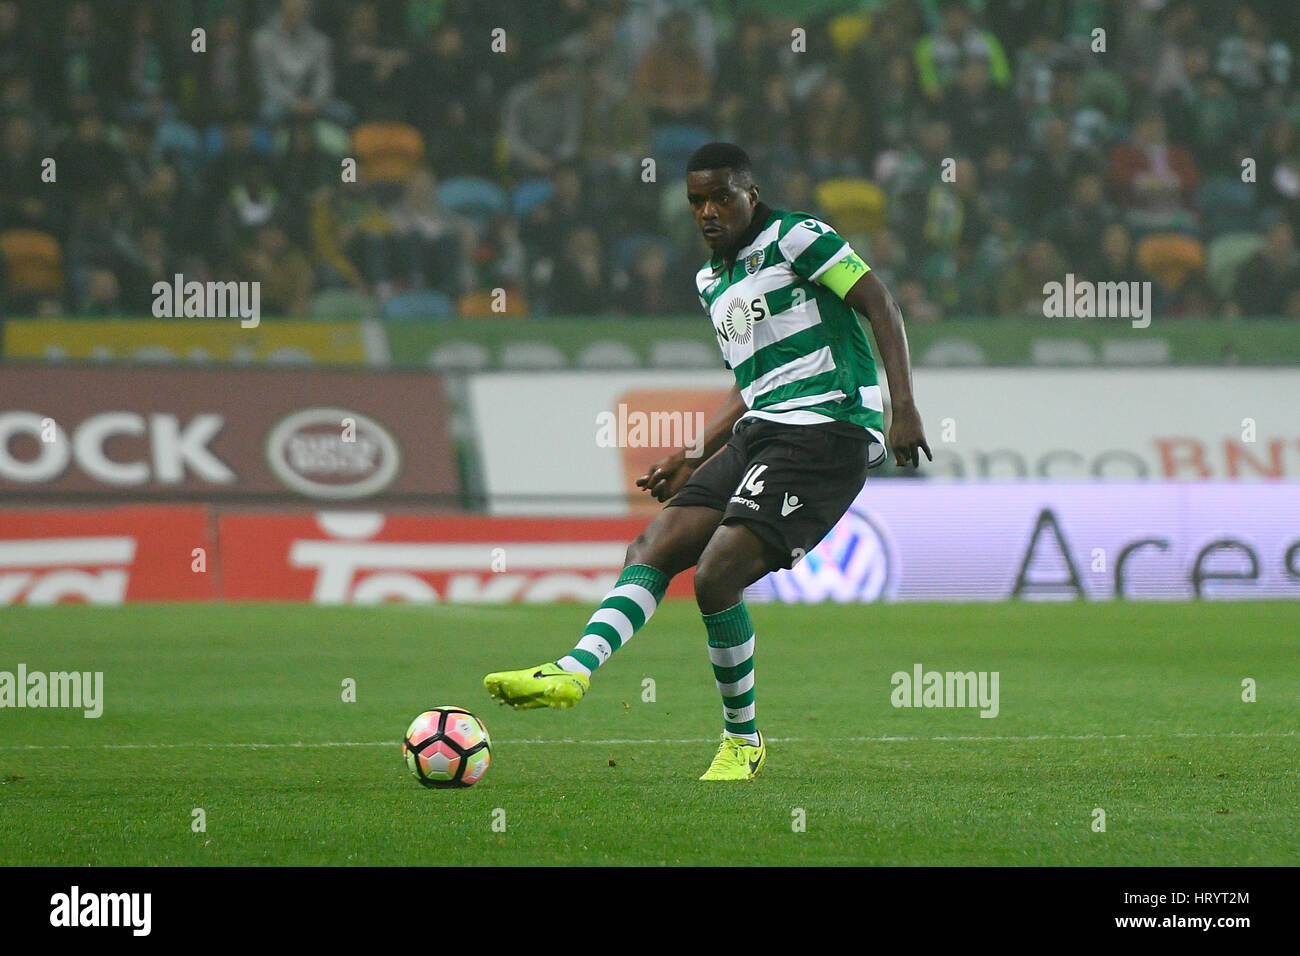 Portugal, Lisbon, Mar. 05, 2017 - FOOTBALL - William Carvalho, Sporting midfielder, in action during match between Sporting Clube de Portugal and Vitória Guimarães for Portuguese Football League match at Estádio Alvalade XXI, in Lisbon, Portugal. Credit: Bruno de Carvalho/Alamy Live News Stock Photo